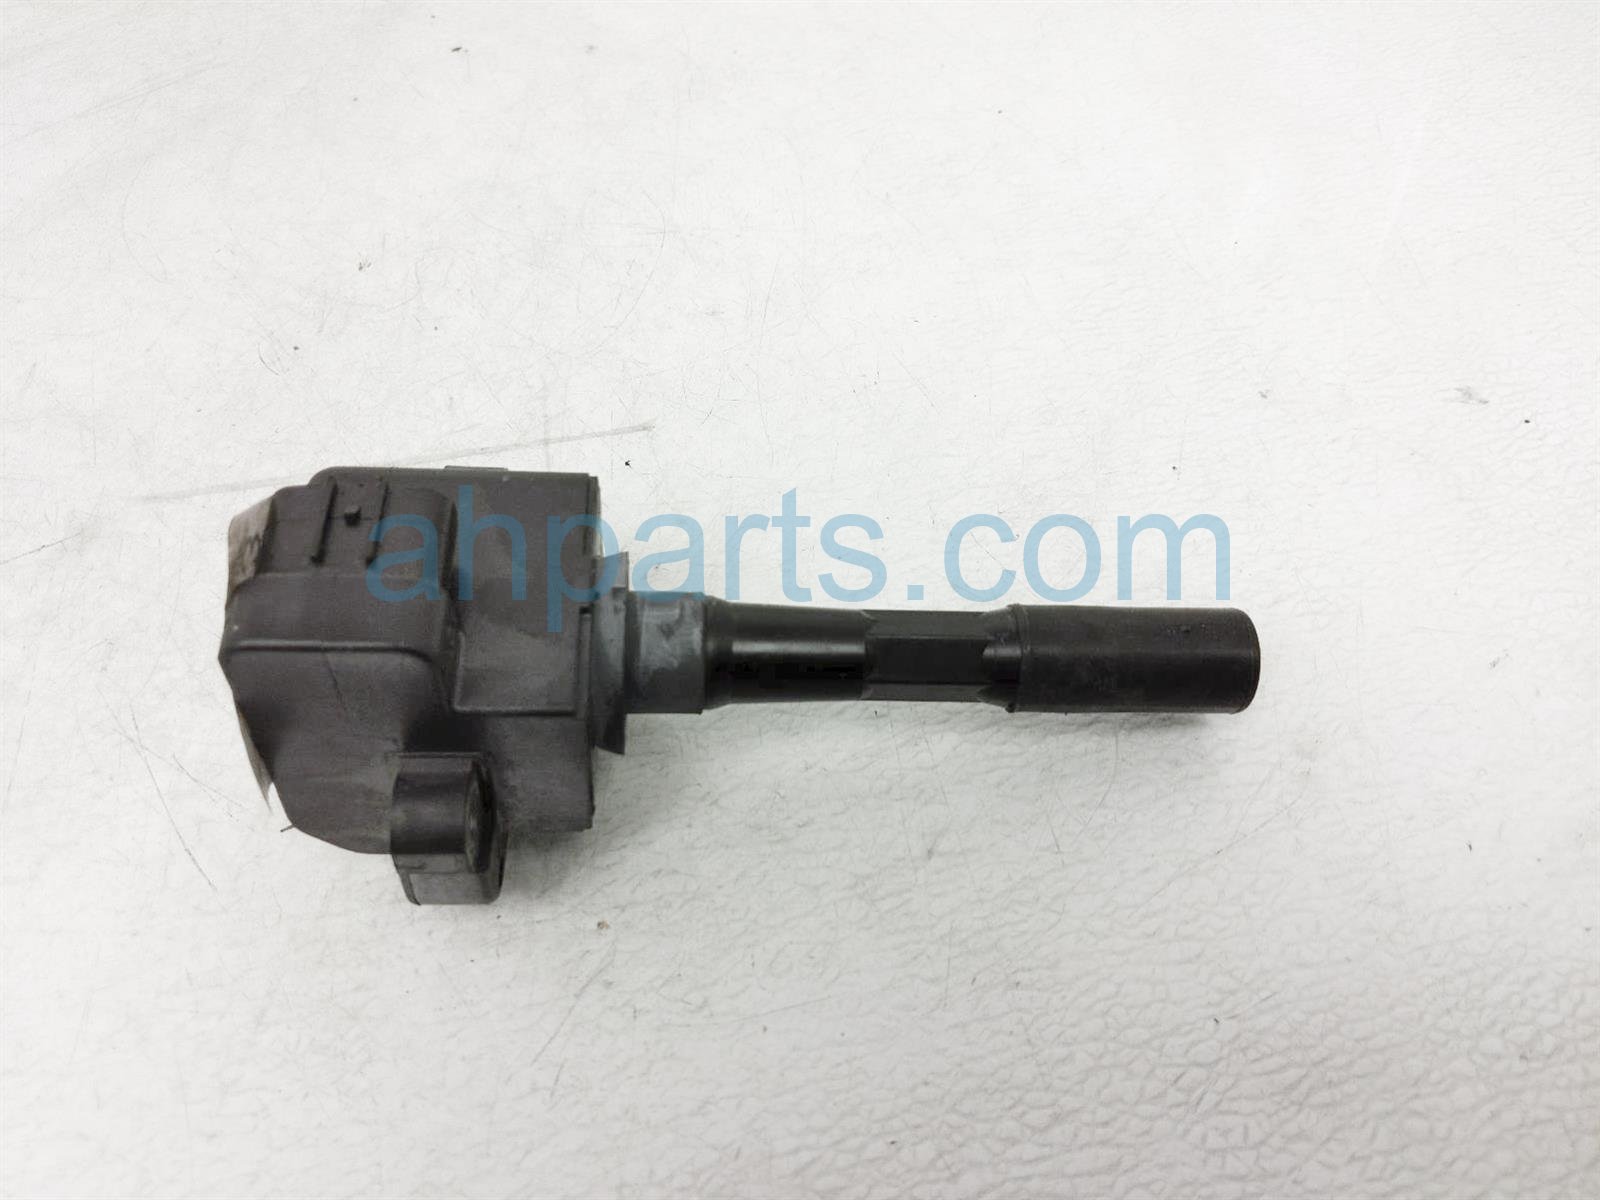 $60 Acura FRONT IGNITION COIL